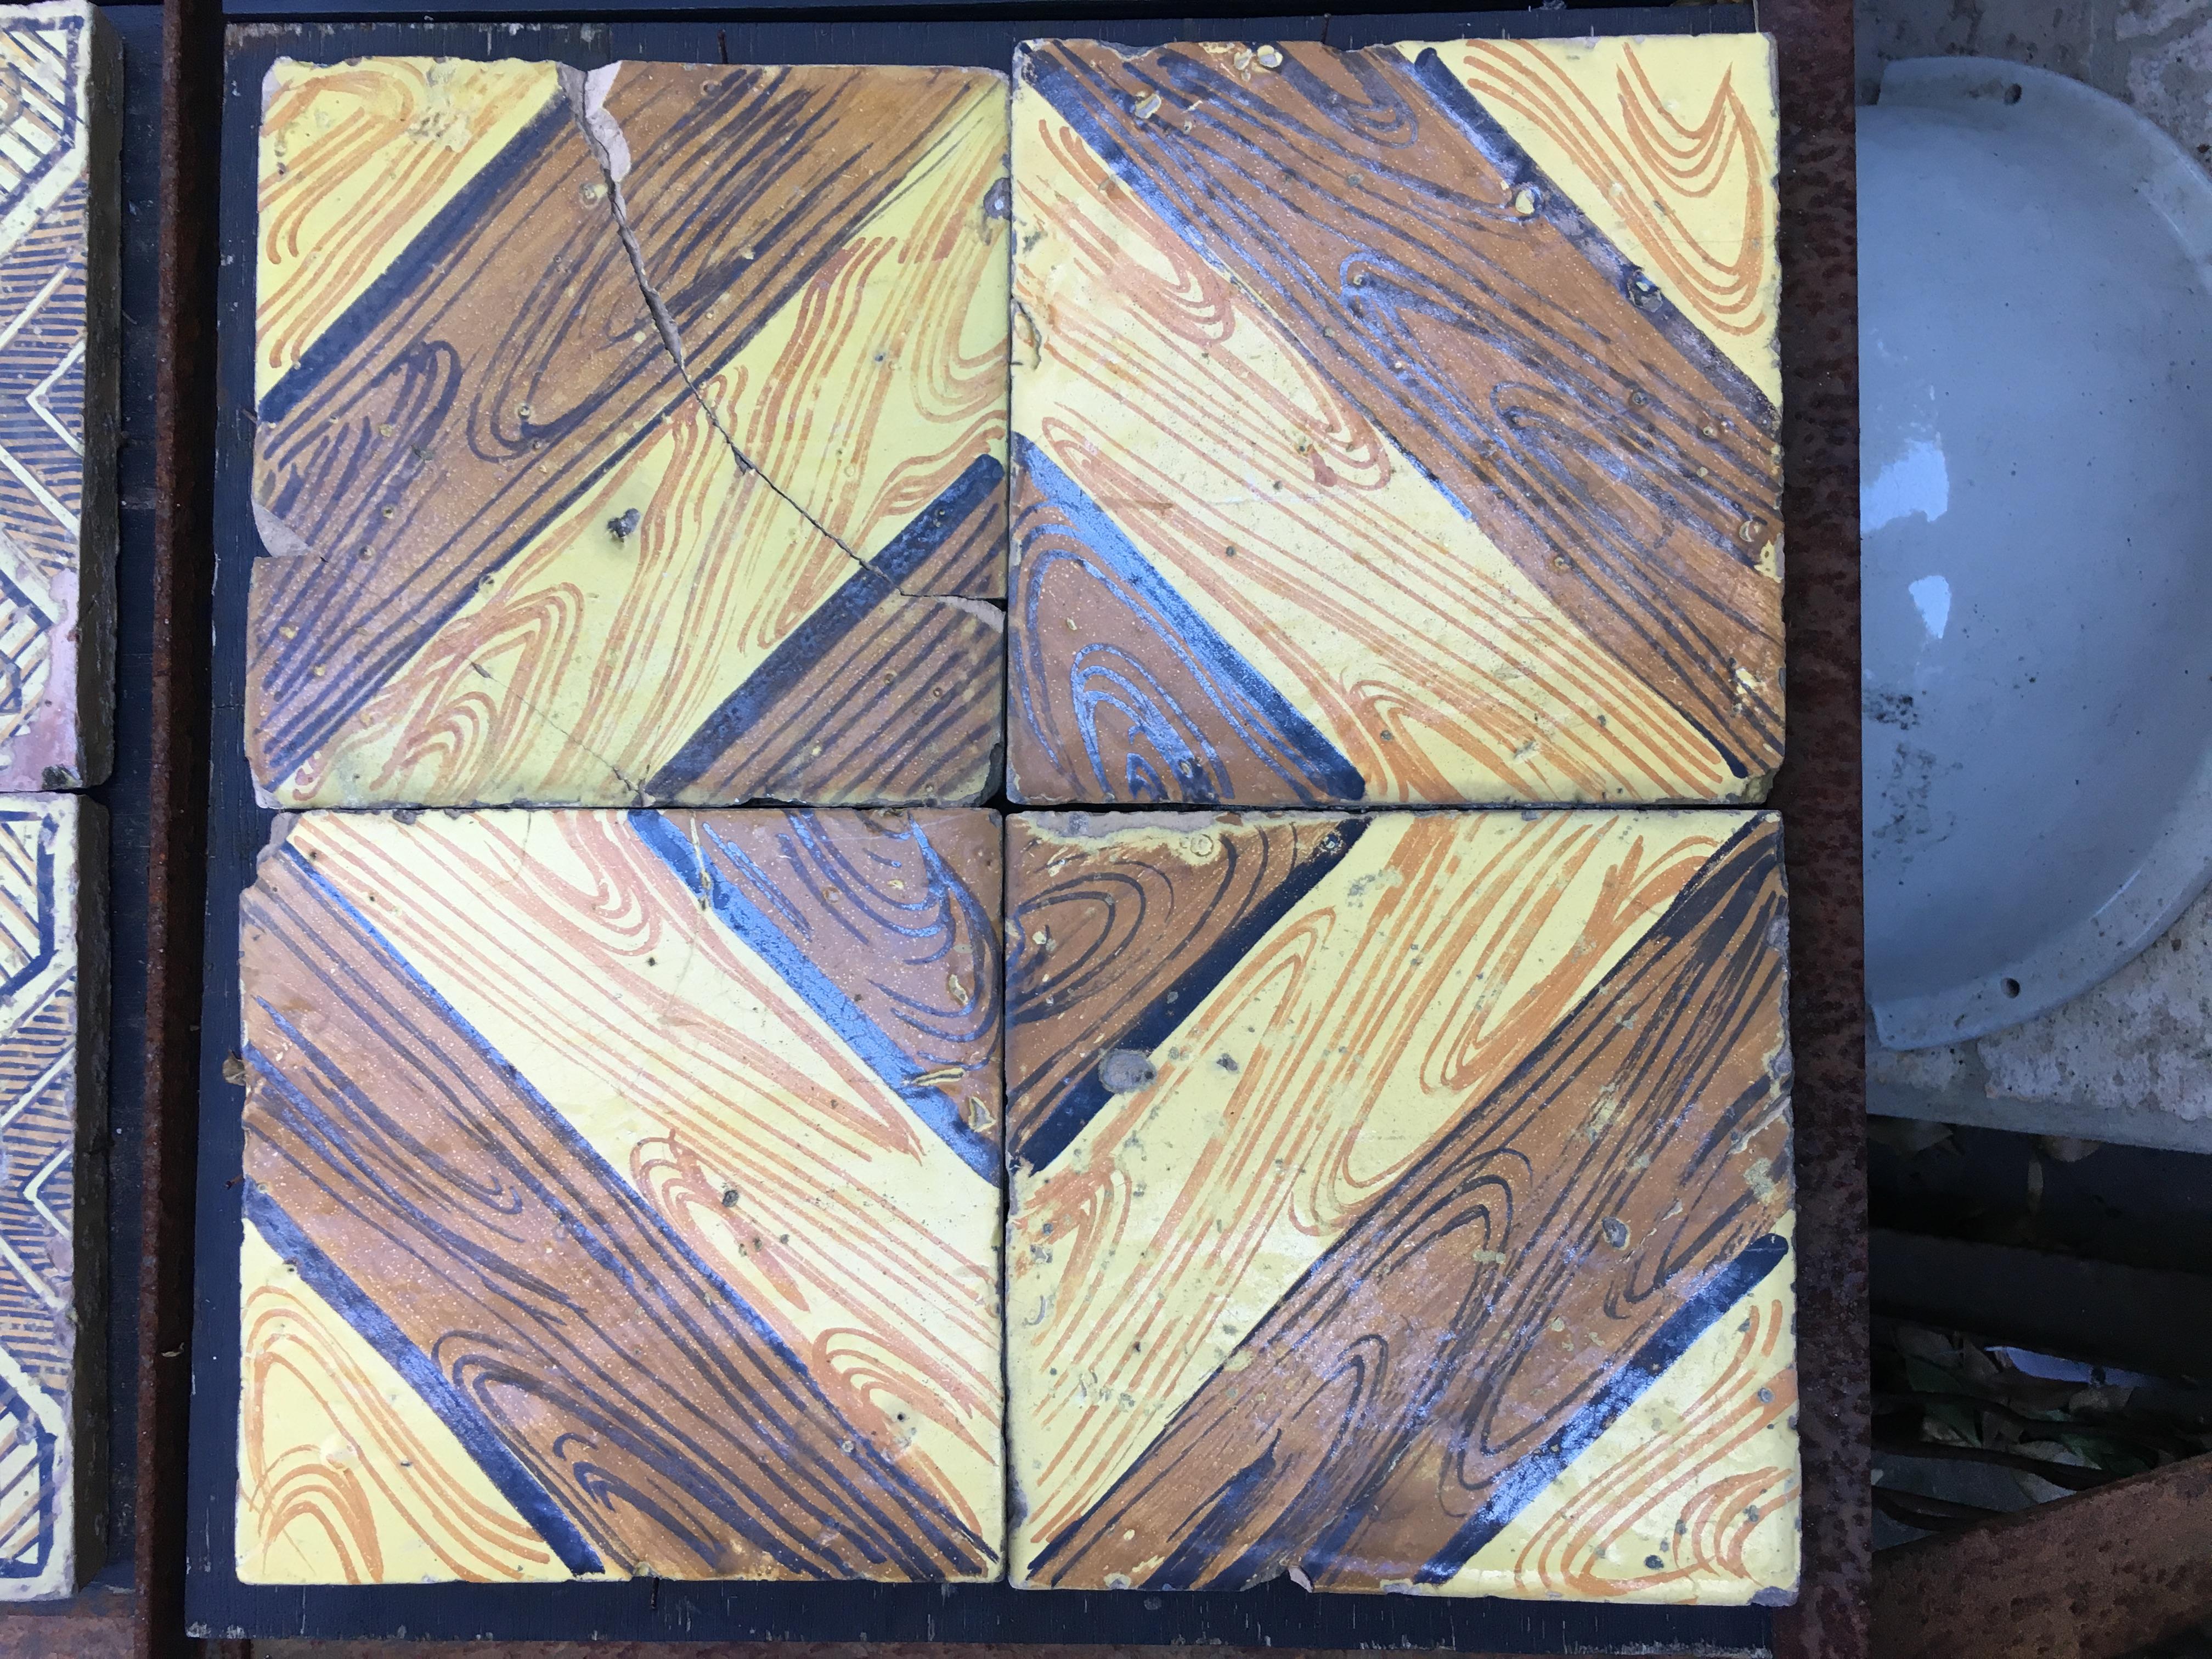 Italian Vintage reclaimed decorated tiles from early 20th century.
25 pieces available, approximately 1 sqm